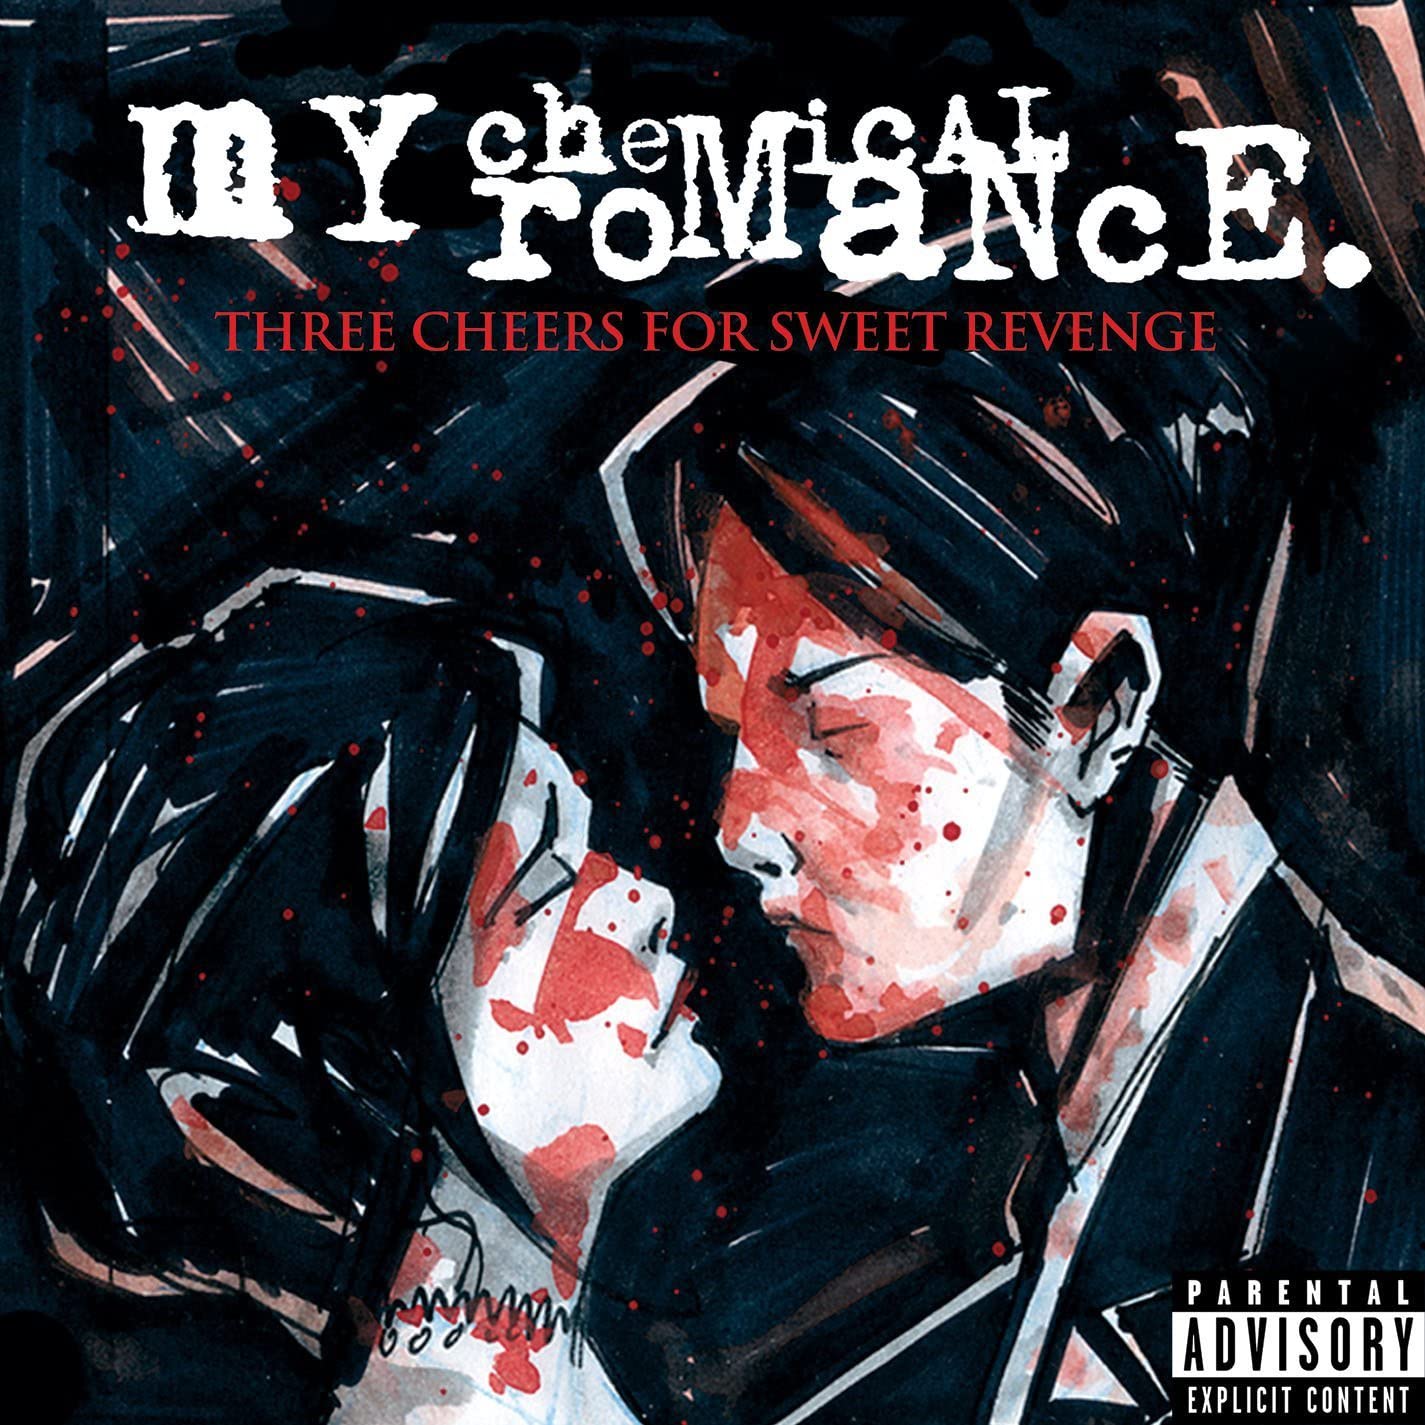 Major label debut on Vinyl from My Chemical Romance, following on from 2002's 'I Brought You My Bullets, You Brought Me Your Love'.